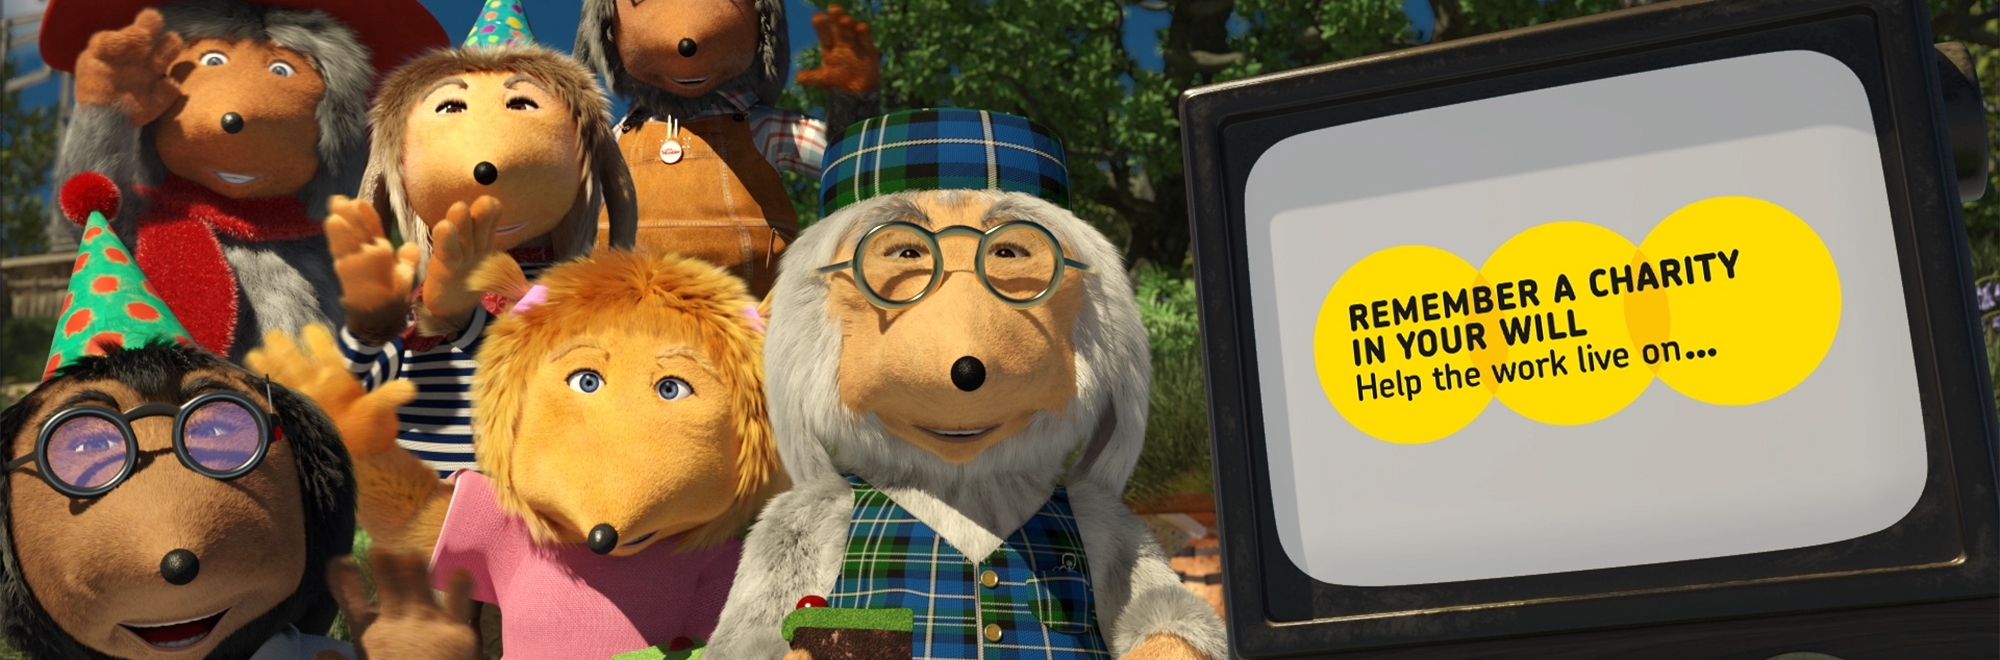 Atomic London launch ‘The Greatest Gift’ for Remember A Charity Week featuring the Wombles